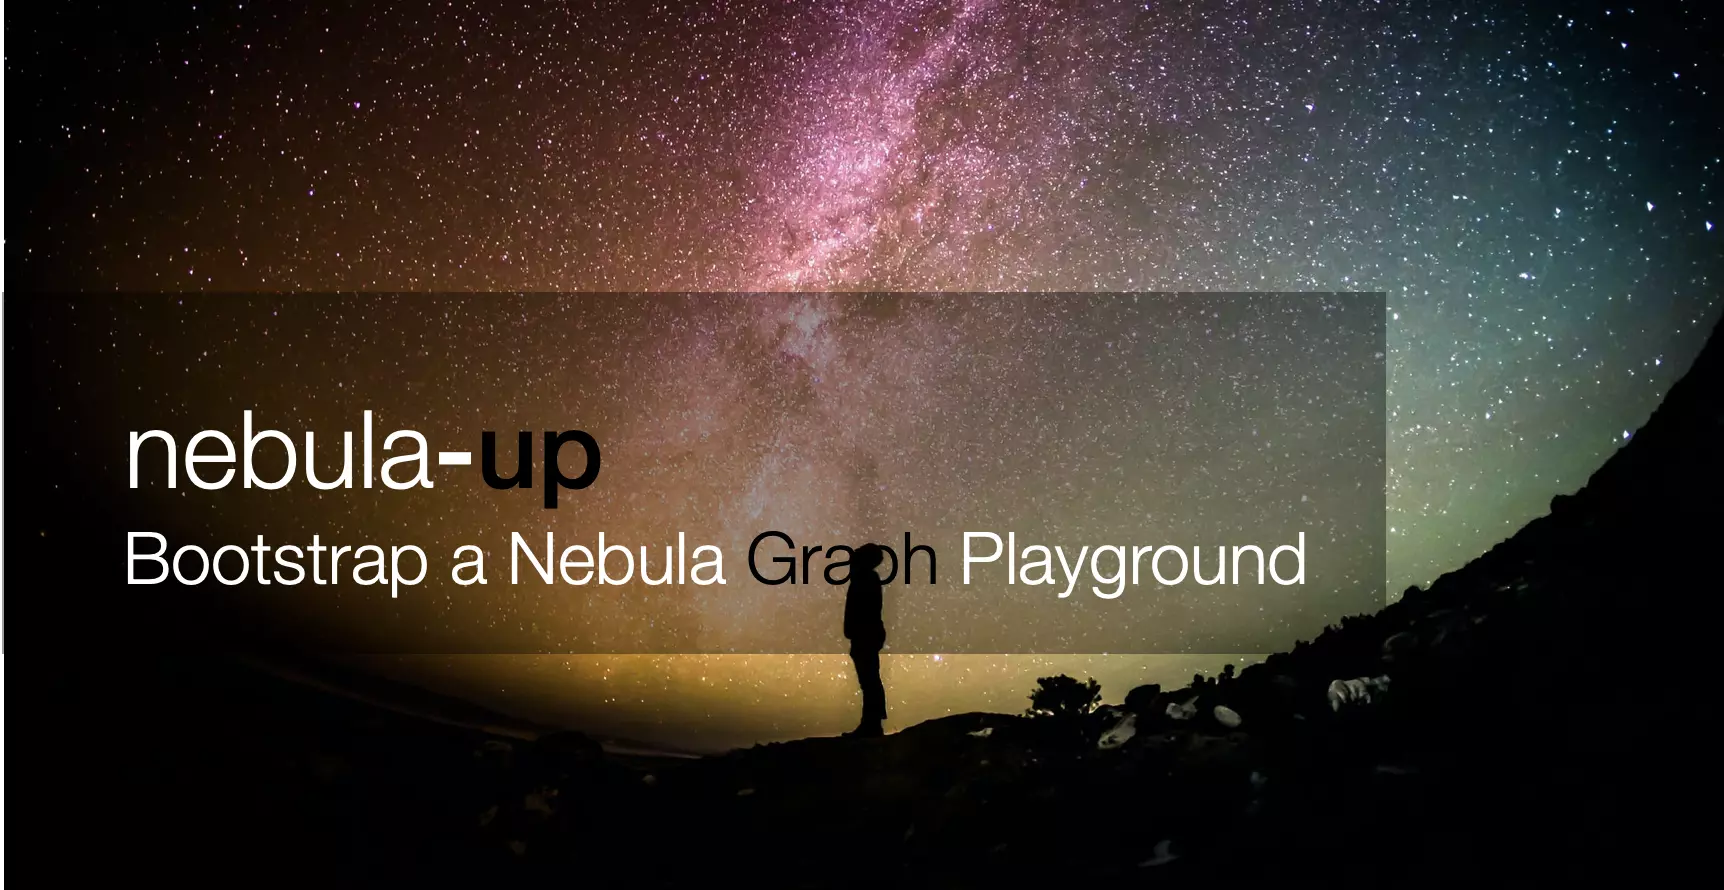 A PoC utility for the newcomers or developers to bootstrap a nebula-graph playground in a oneliner command.